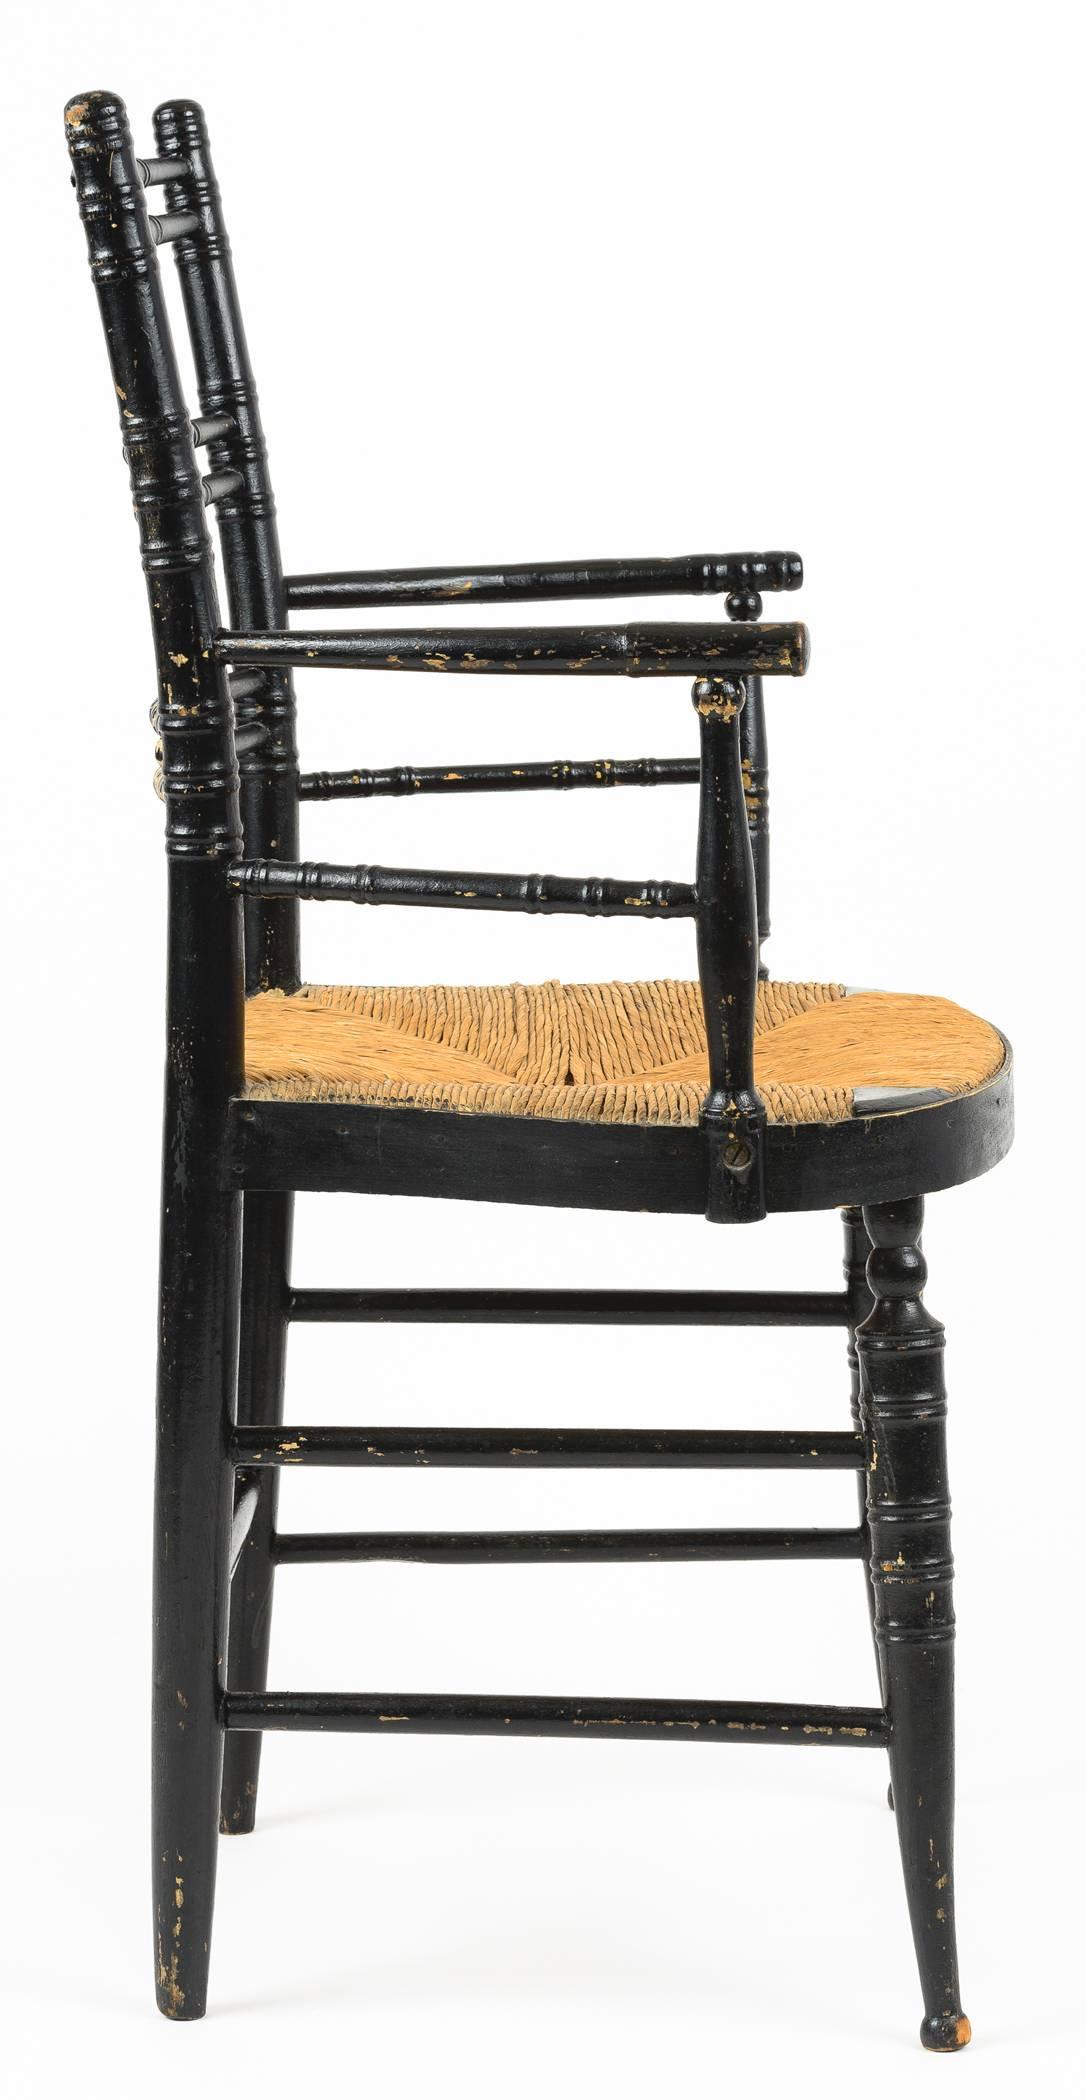 The late Sheraton chair has ball and turned detail on back as well as the front stretcher. The turned arms are slightly bowed joining the back and off set from the bending of the front of the seat. The legs has ring detailing as does the arms and